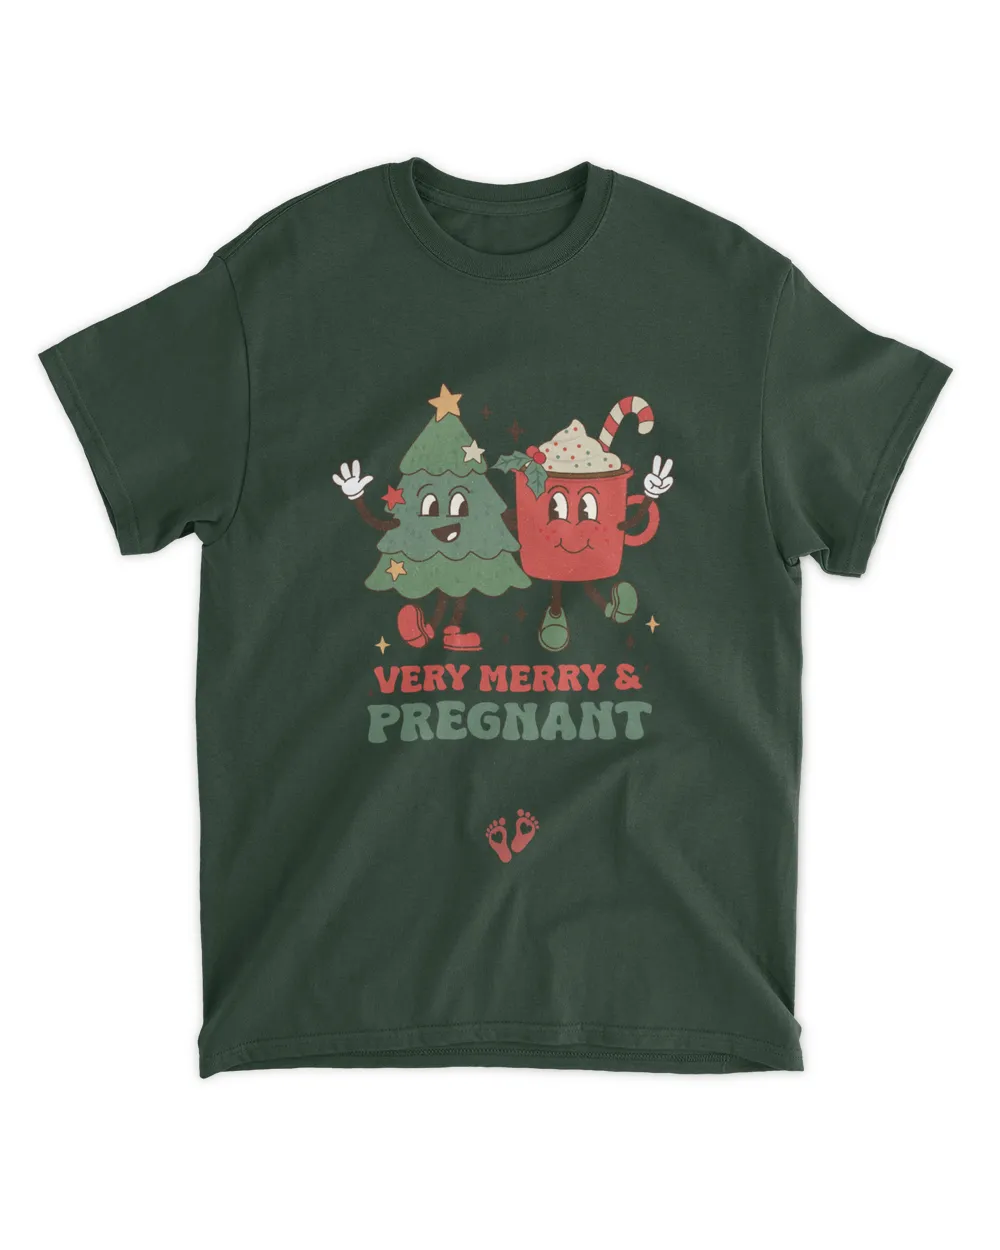 Very Merry and Pregnant - Pregnancy Announcement Retro Style Sweatshirt